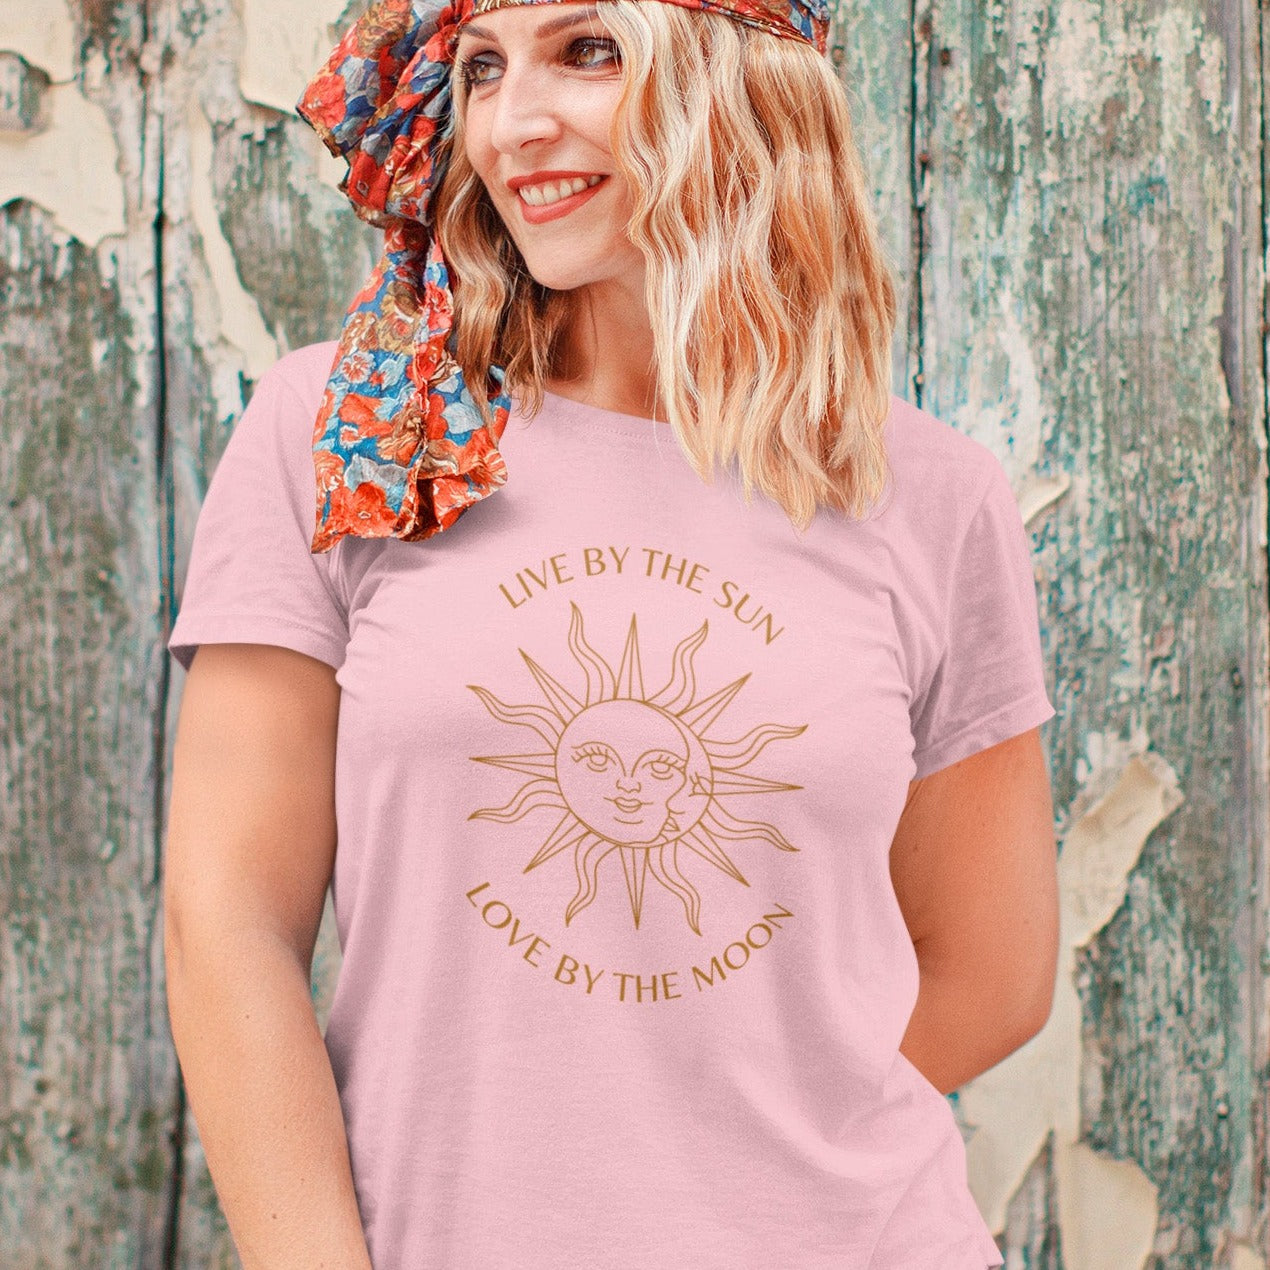 t-shirt-mockup-featuring-a-smiling-woman-posing-by-an-old-wooden-wall